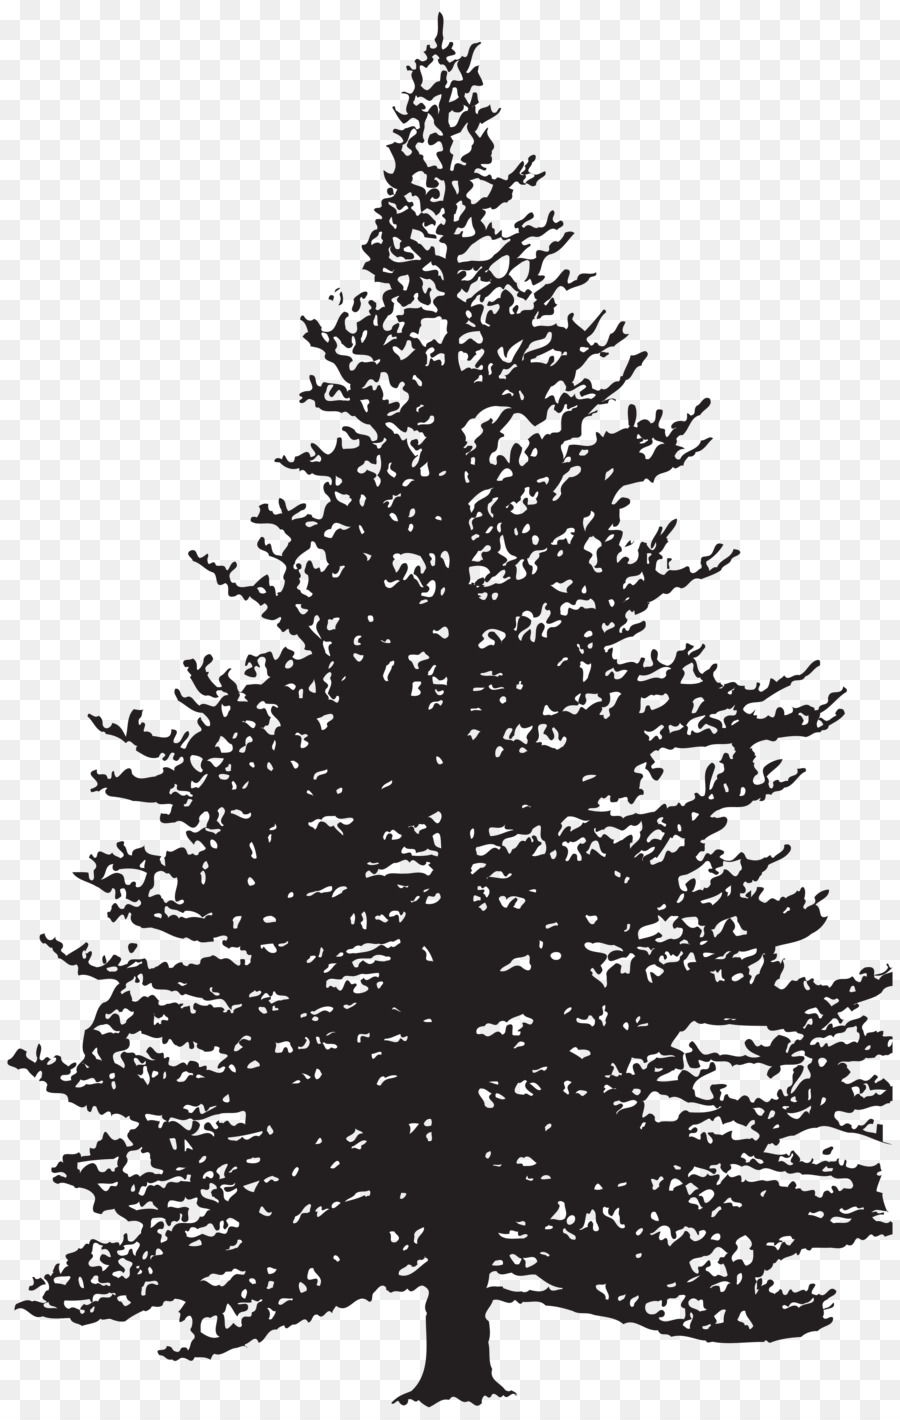 Free Pine Tree Silhouette Png, Download Free Pine Tree Silhouette Png ...